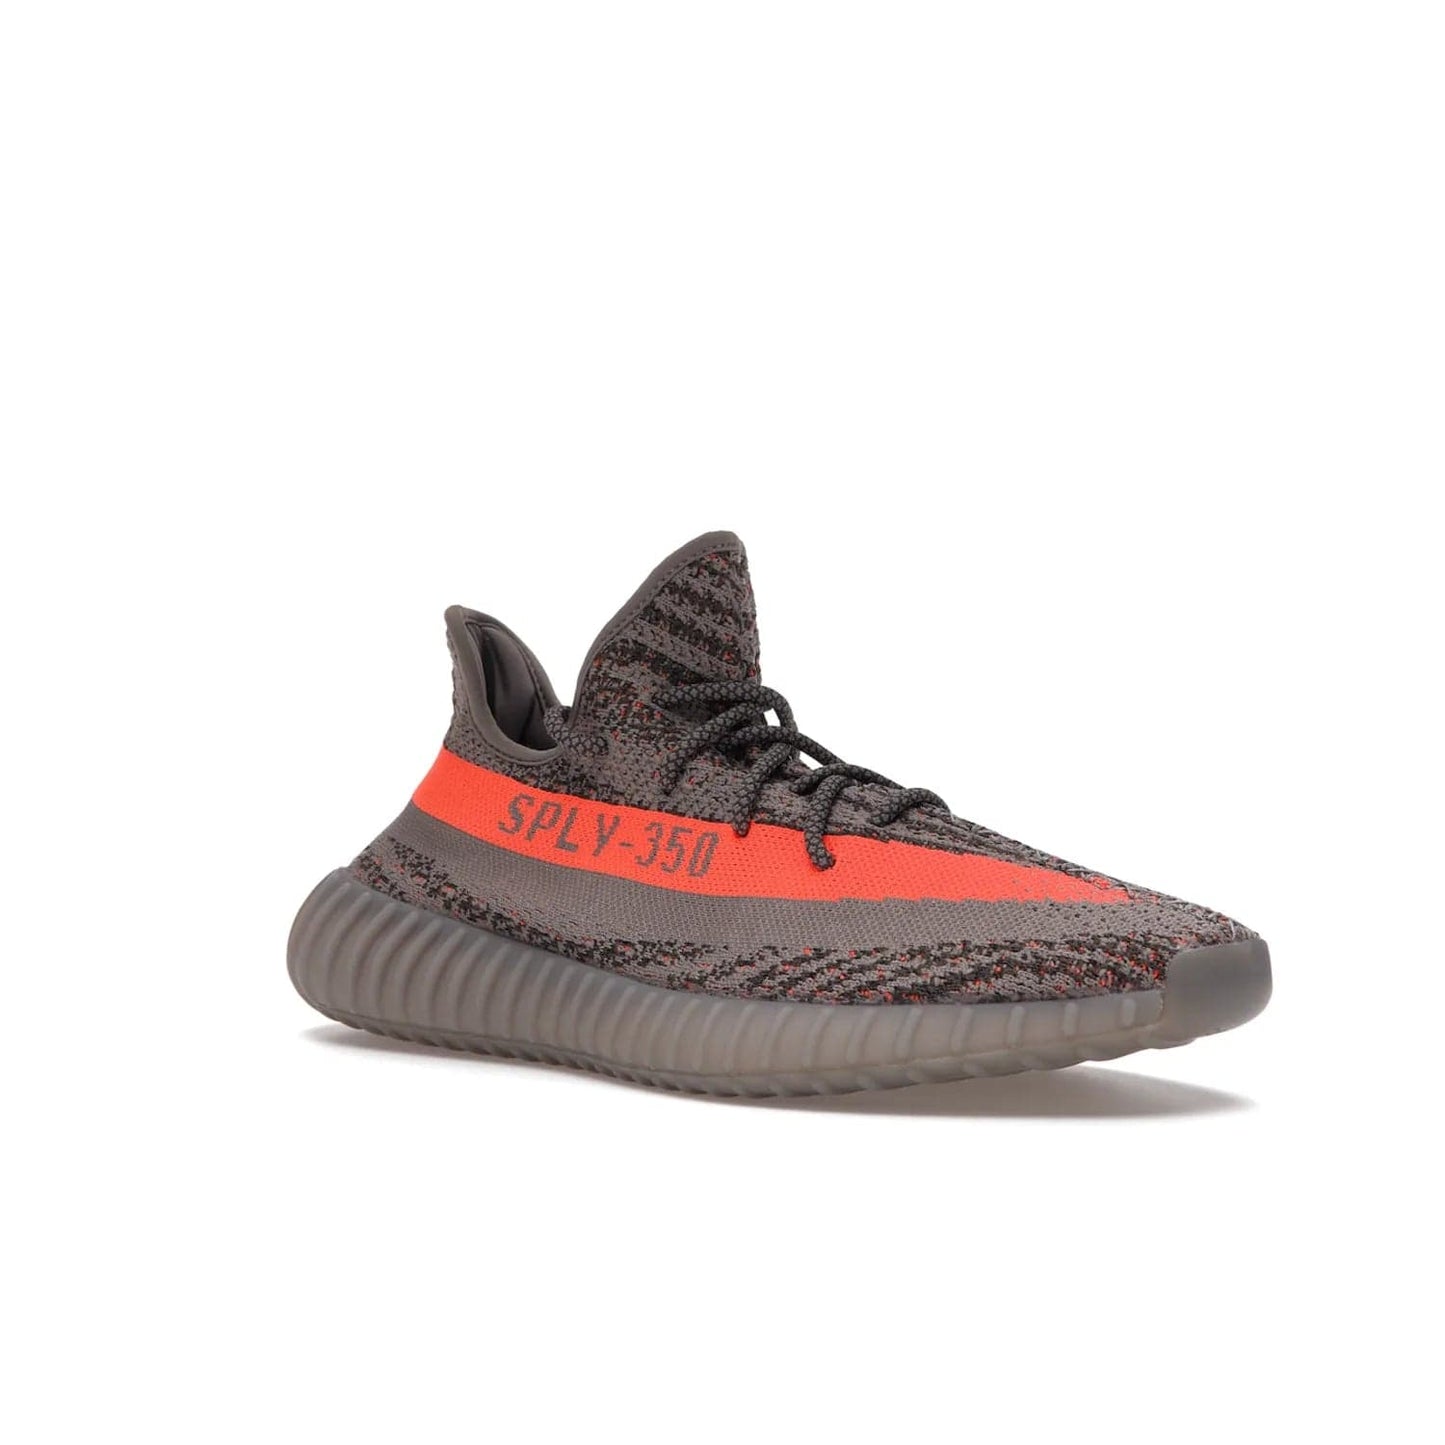 adidas Yeezy Boost 350 V2 Beluga Reflective - Image 5 - Only at www.BallersClubKickz.com - Shop the adidas Yeezy Boost 350 V2 Beluga Reflective: a stylish, reflective sneaker that stands out. Featuring Boost sole, Primeknit upper & signature orange stripe. Available Dec 2021.